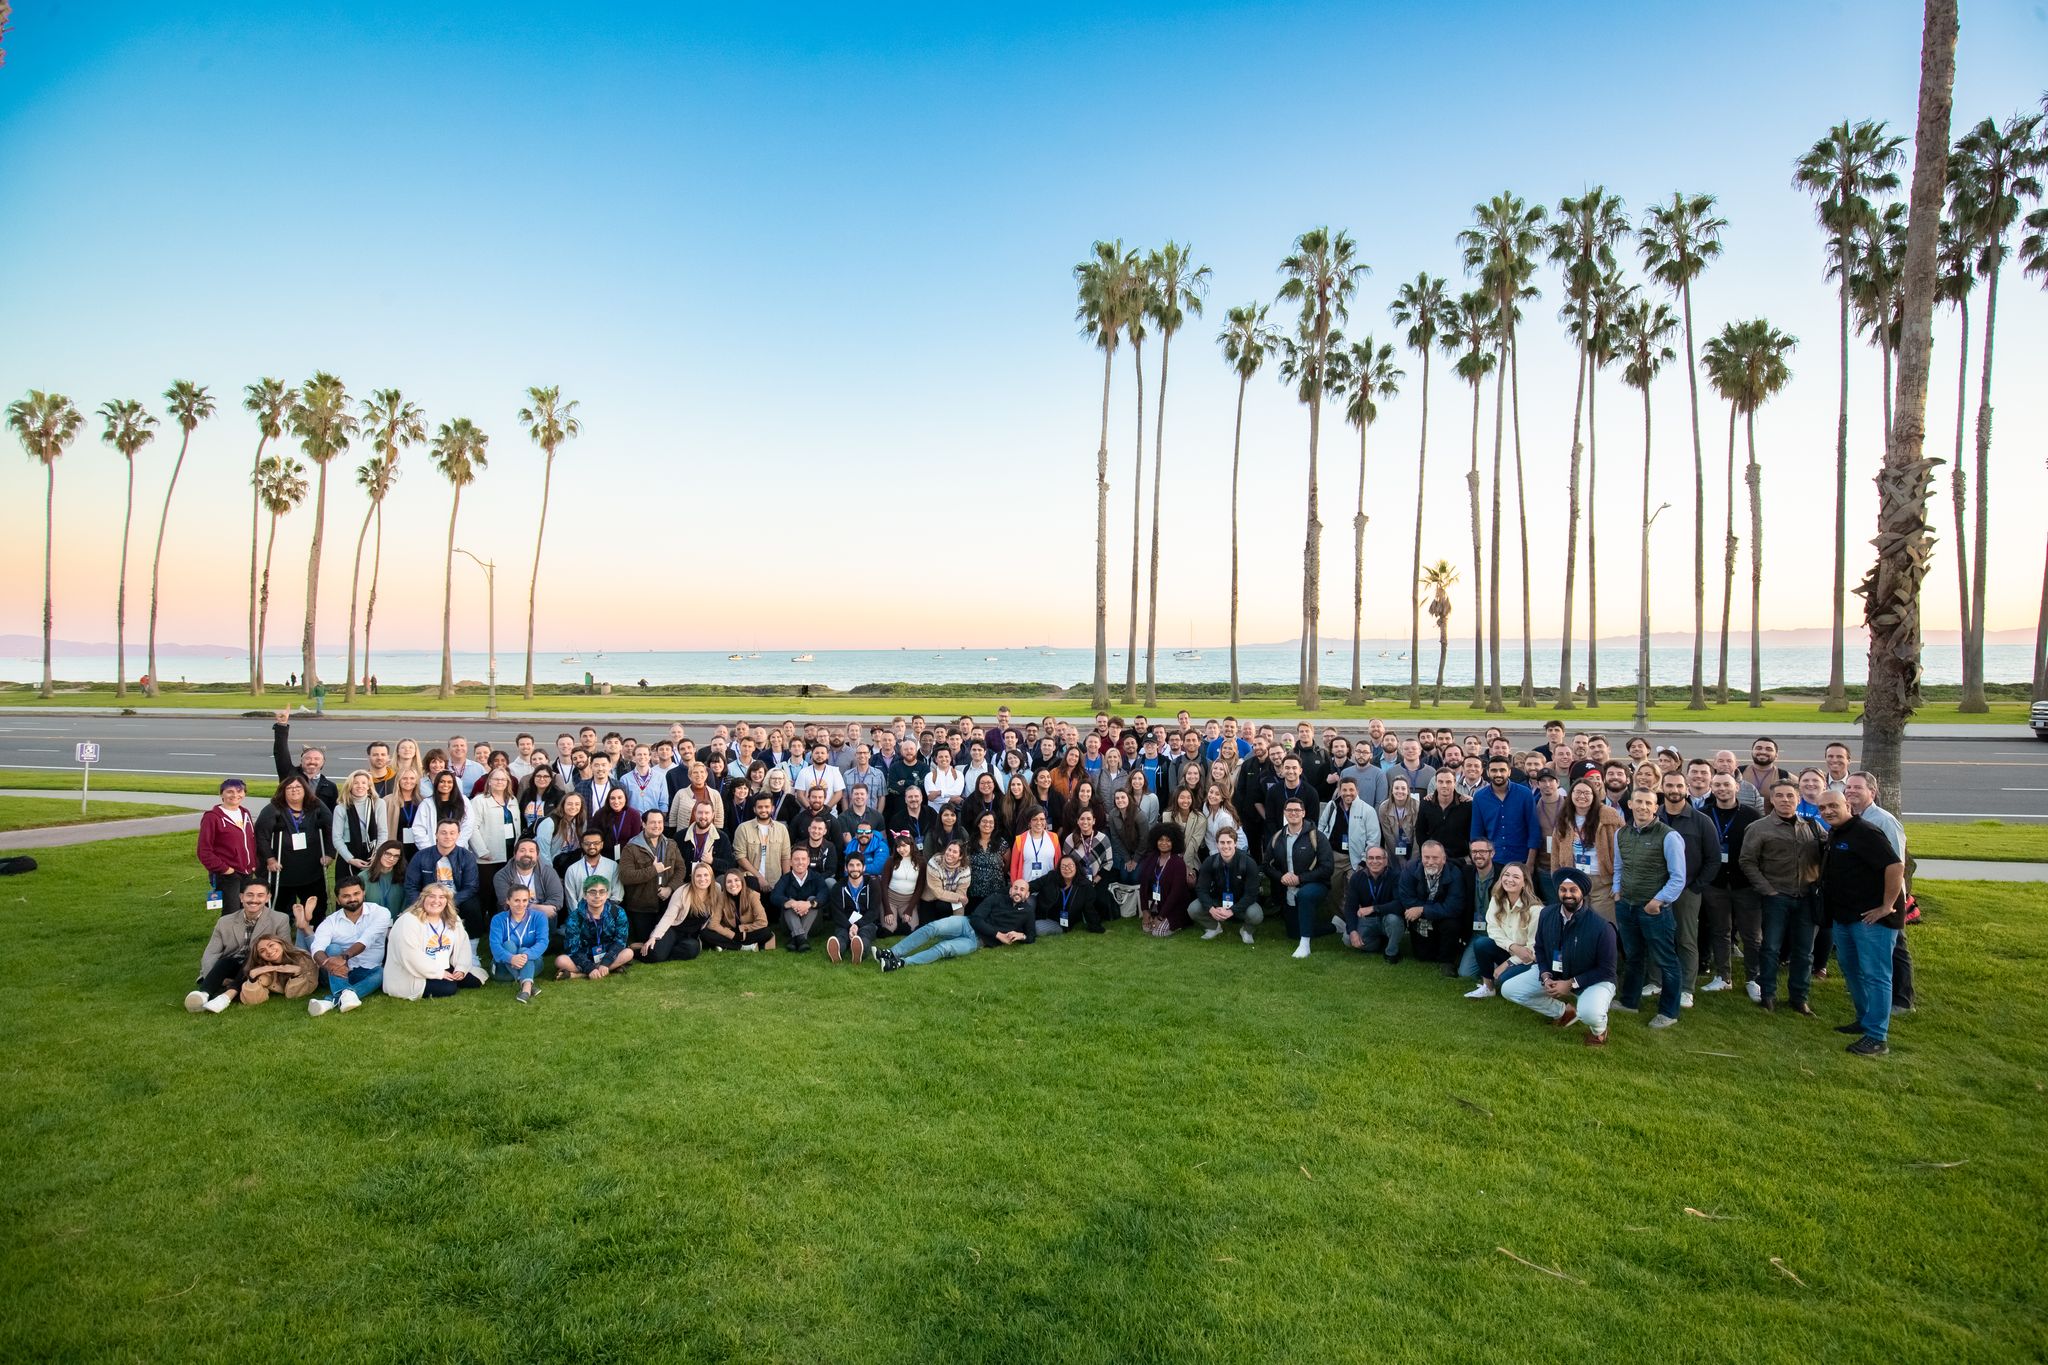 HG Insights' company photo on a green expanse under palm trees